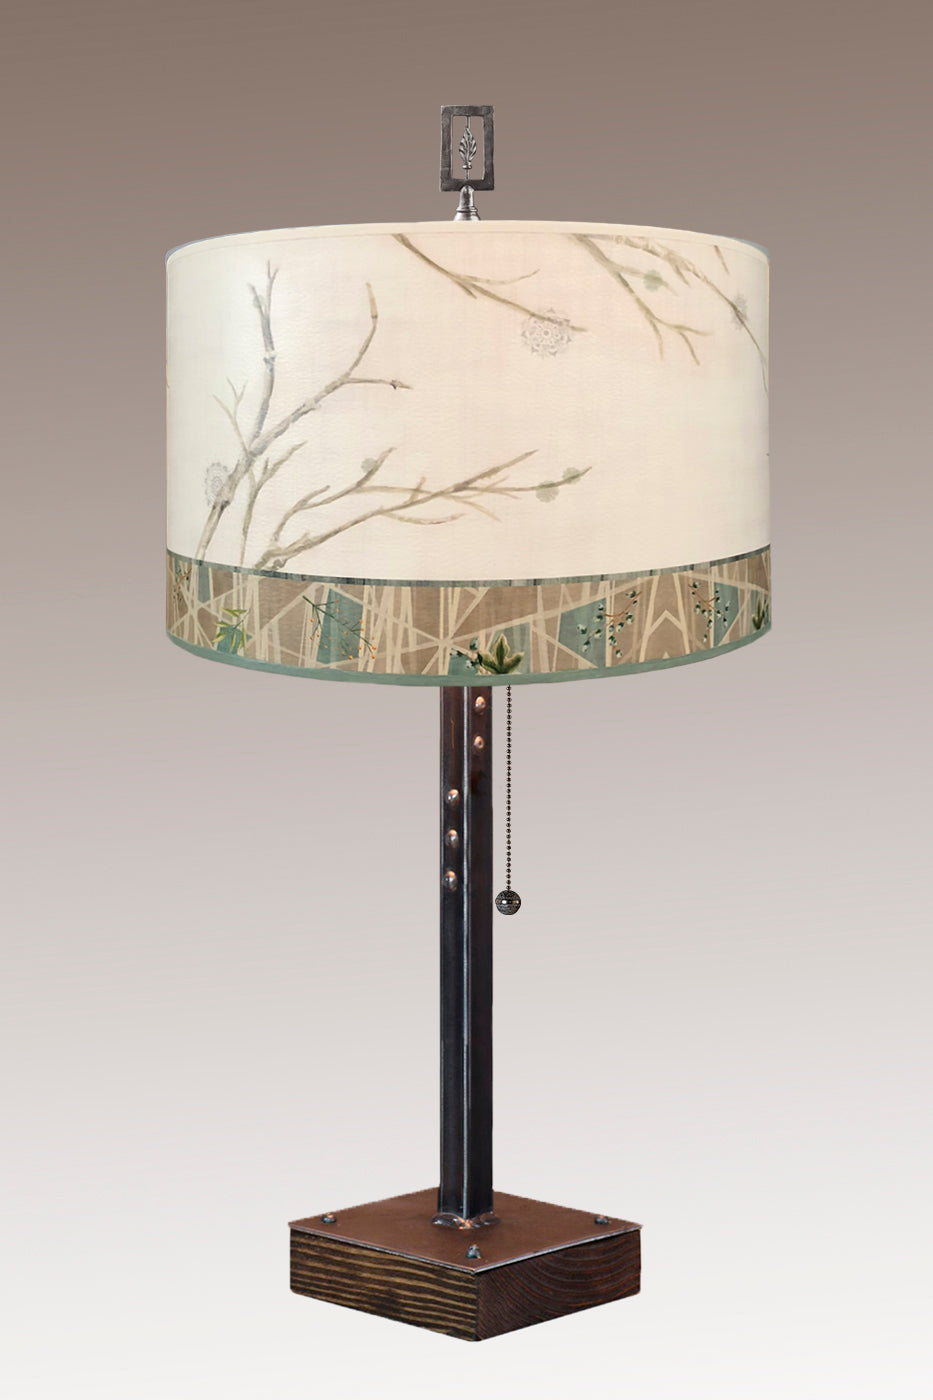 Steel Table Lamp on Wood with Large Drum Shade in Prism Branch